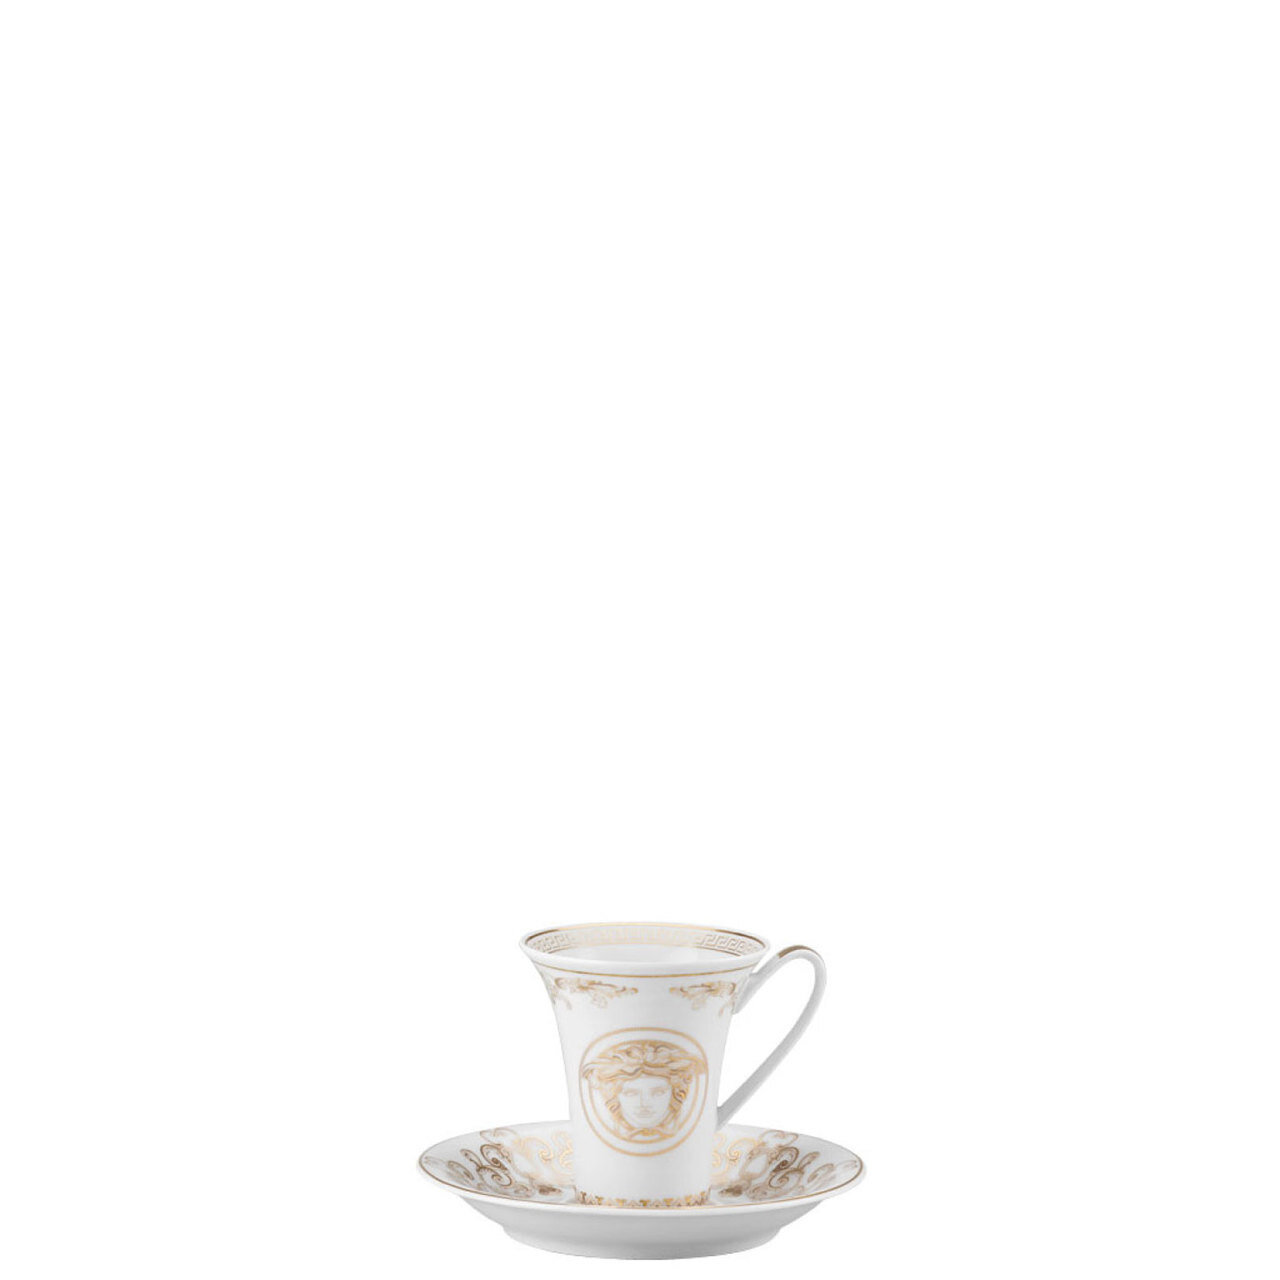 Versace Medusa Gala AD Cup and Saucer 5 Inch